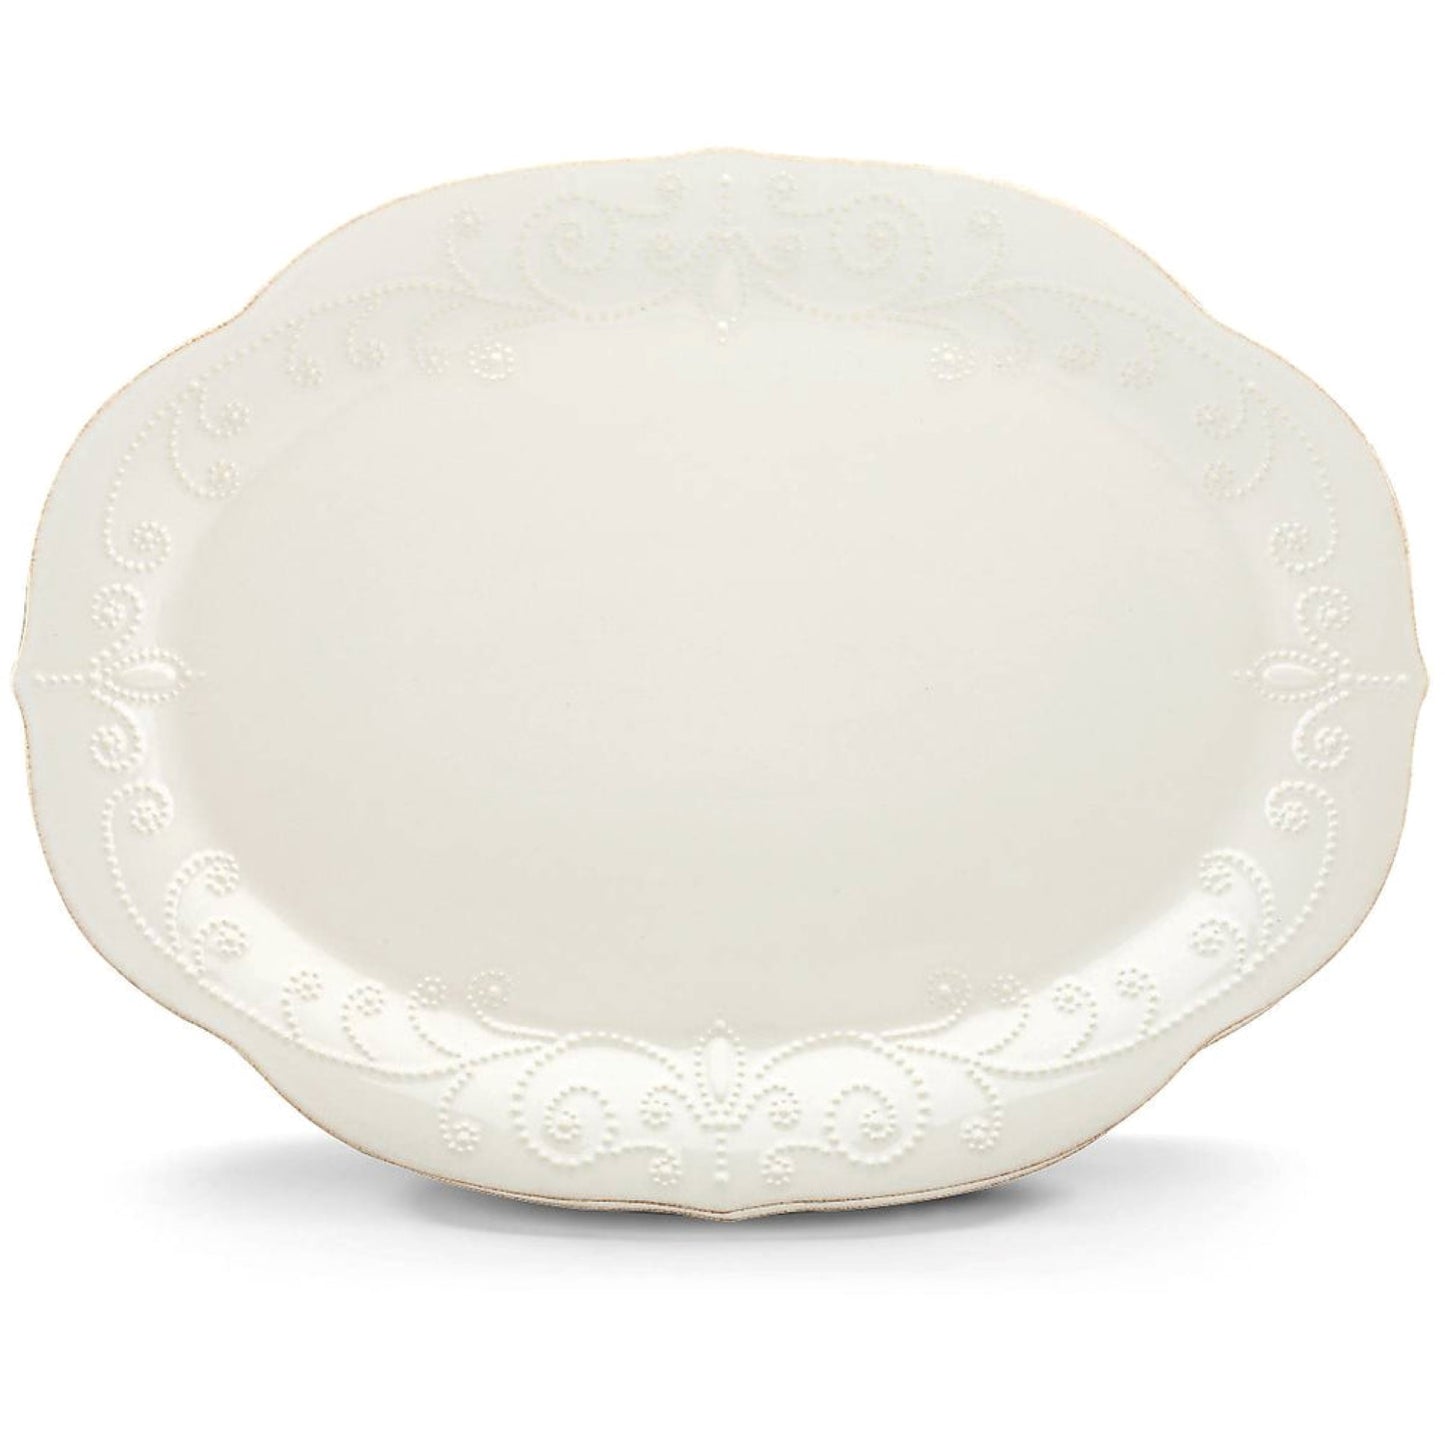 Lenox French Perle Oval Platter